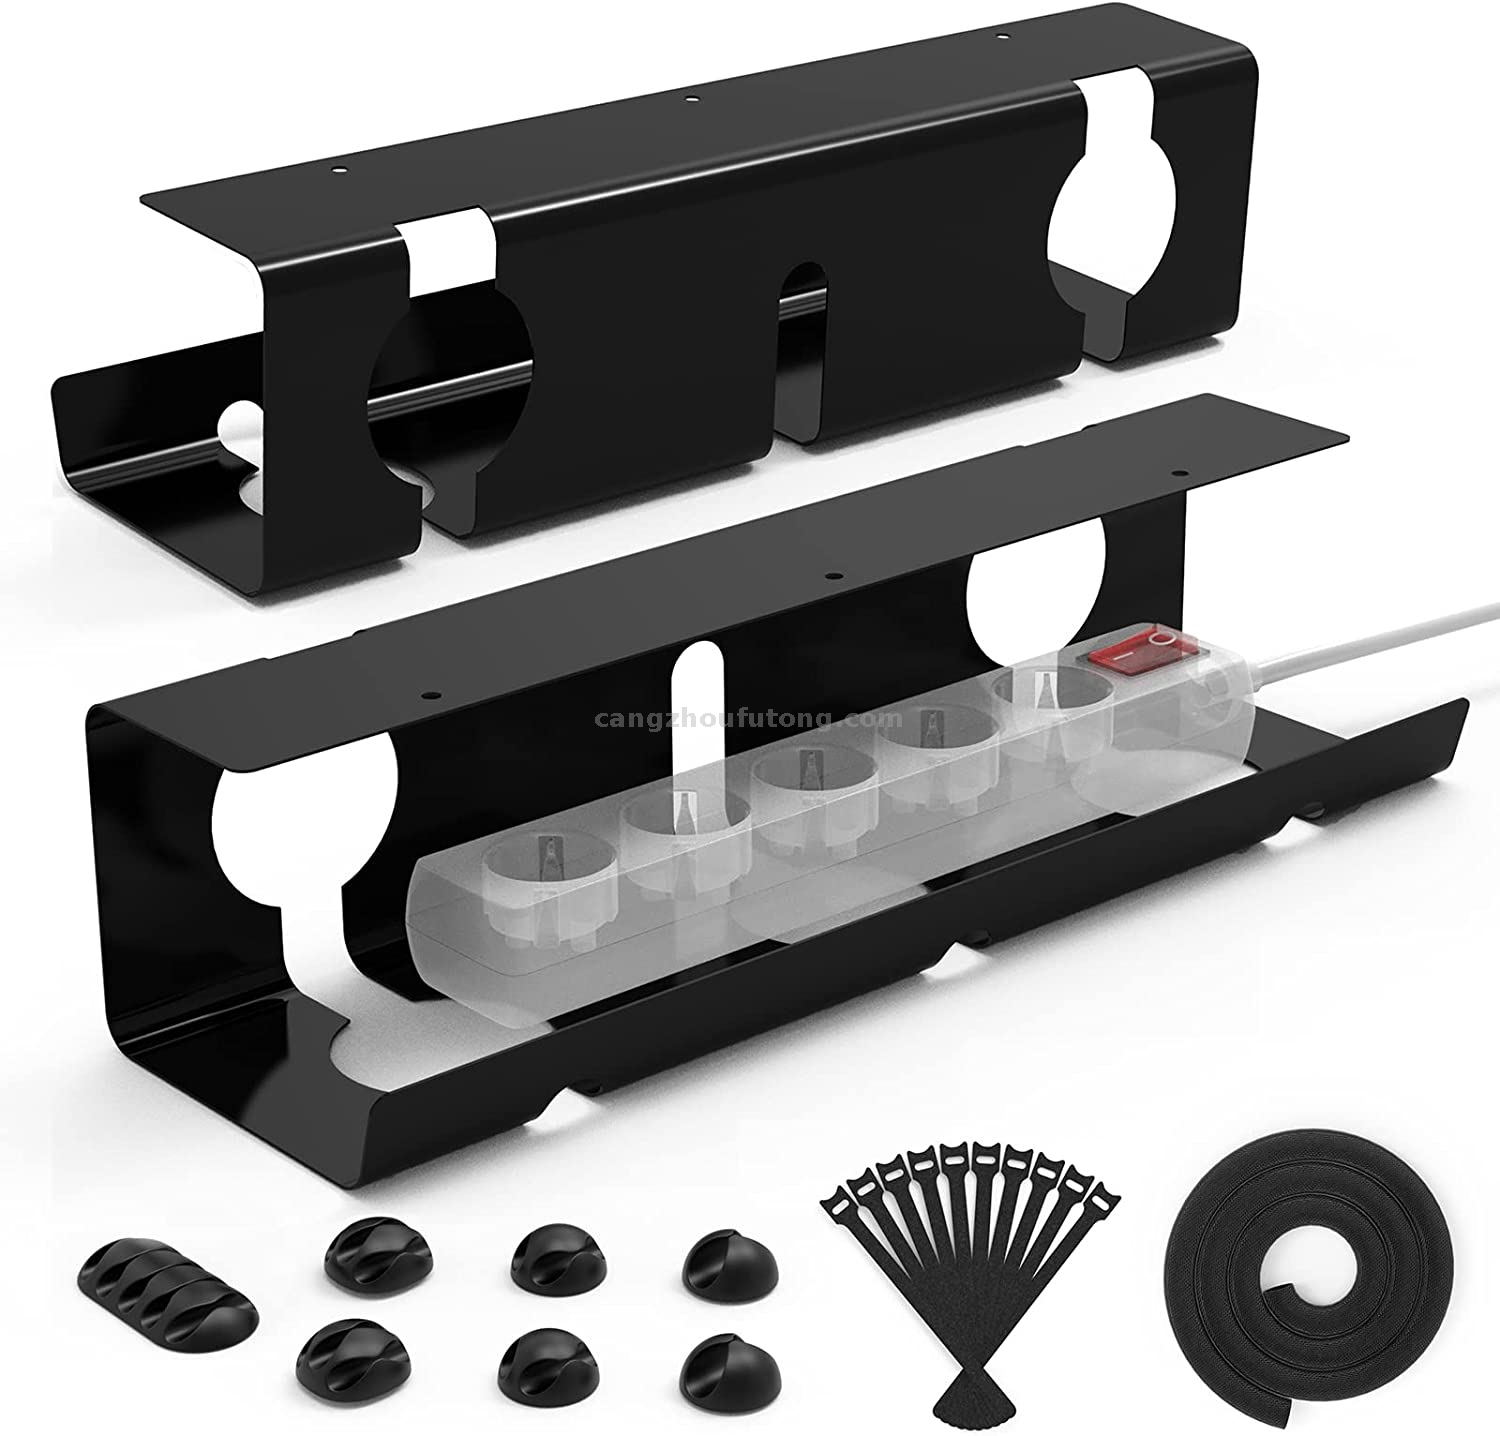 OEM ODM Cable Ties Waterproof Perforated Cable Holder Under Desk Cable Management Tray